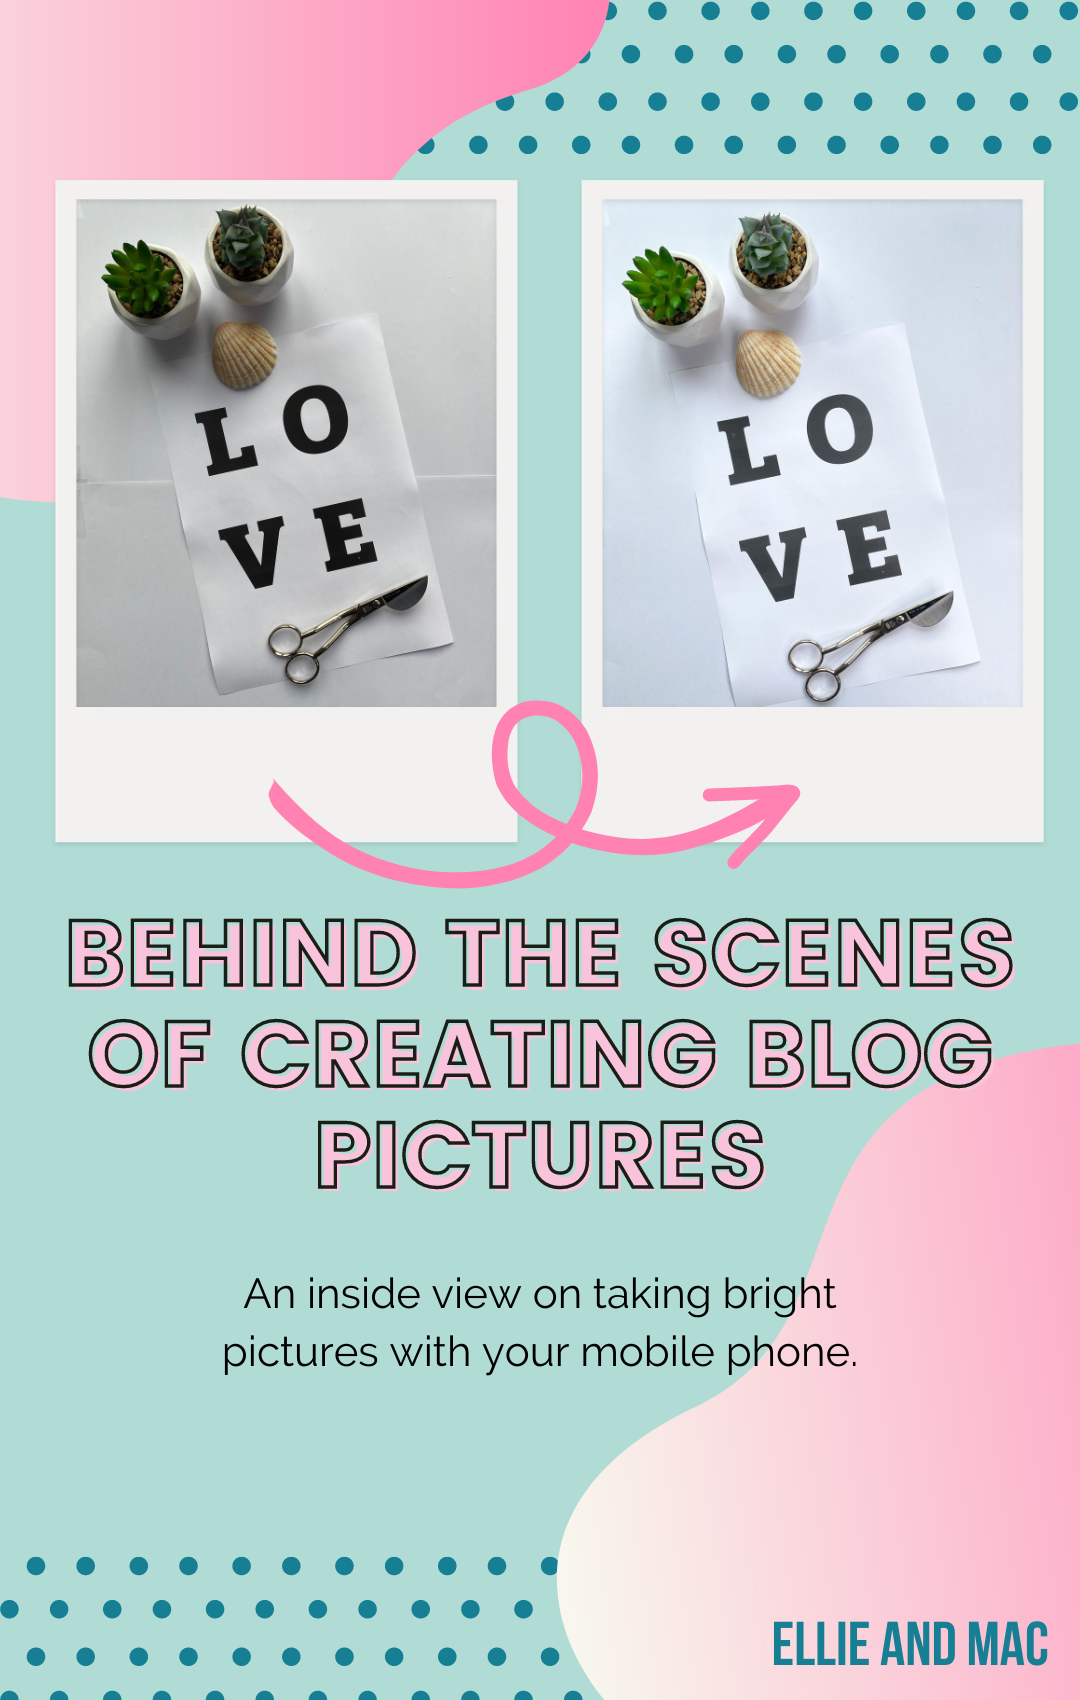 Behind the scenes of creating Blog Pictures